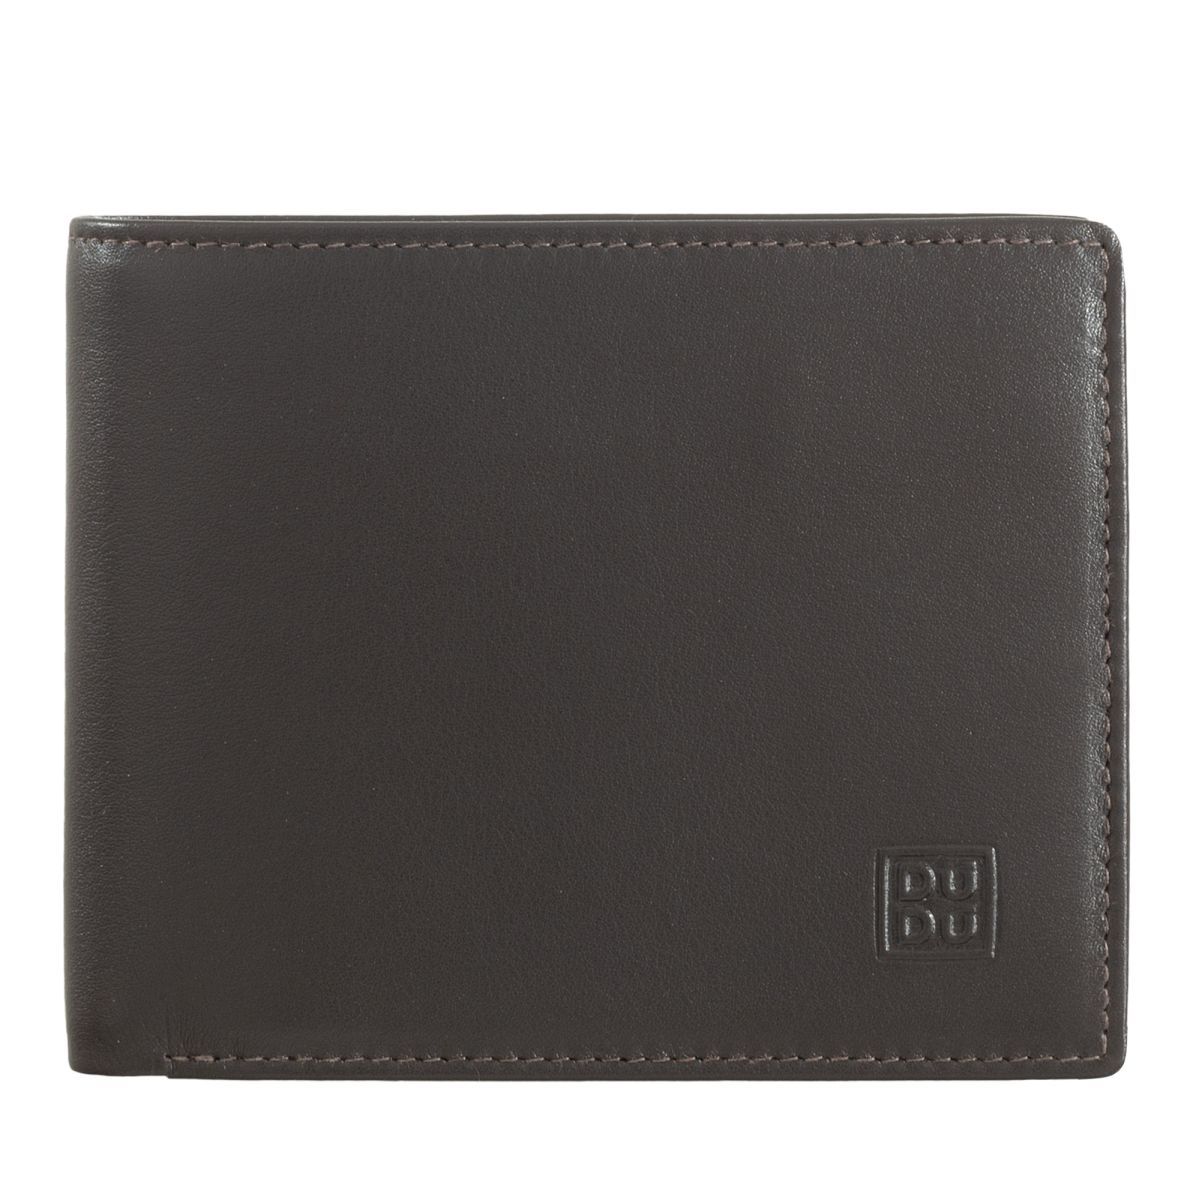 DuDu Leather classic multi color wallet with coin purse and inside flap - Dark Brown